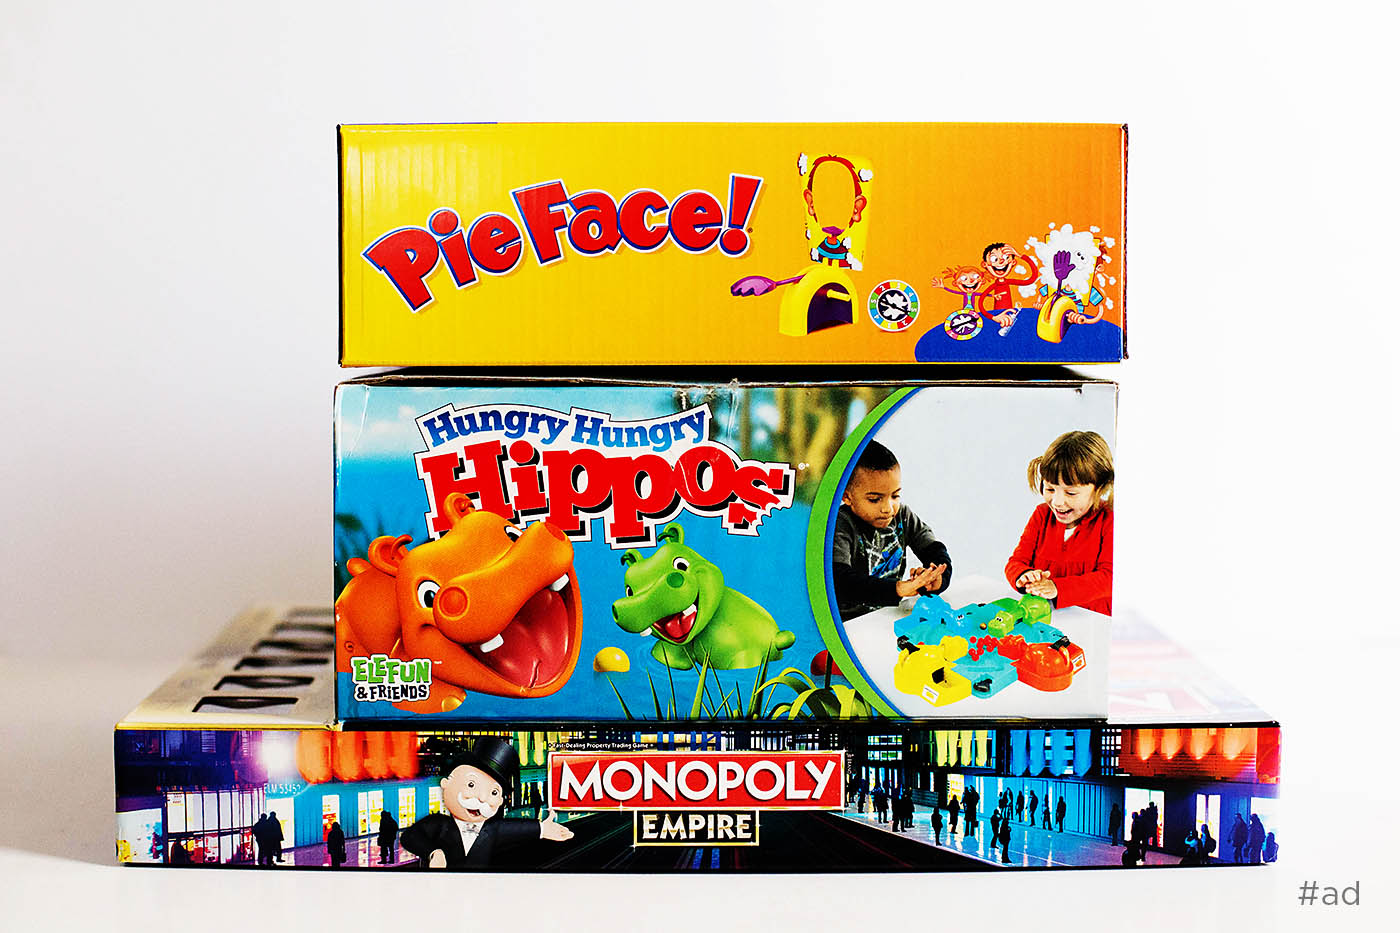 Mix up family game night with these tips!